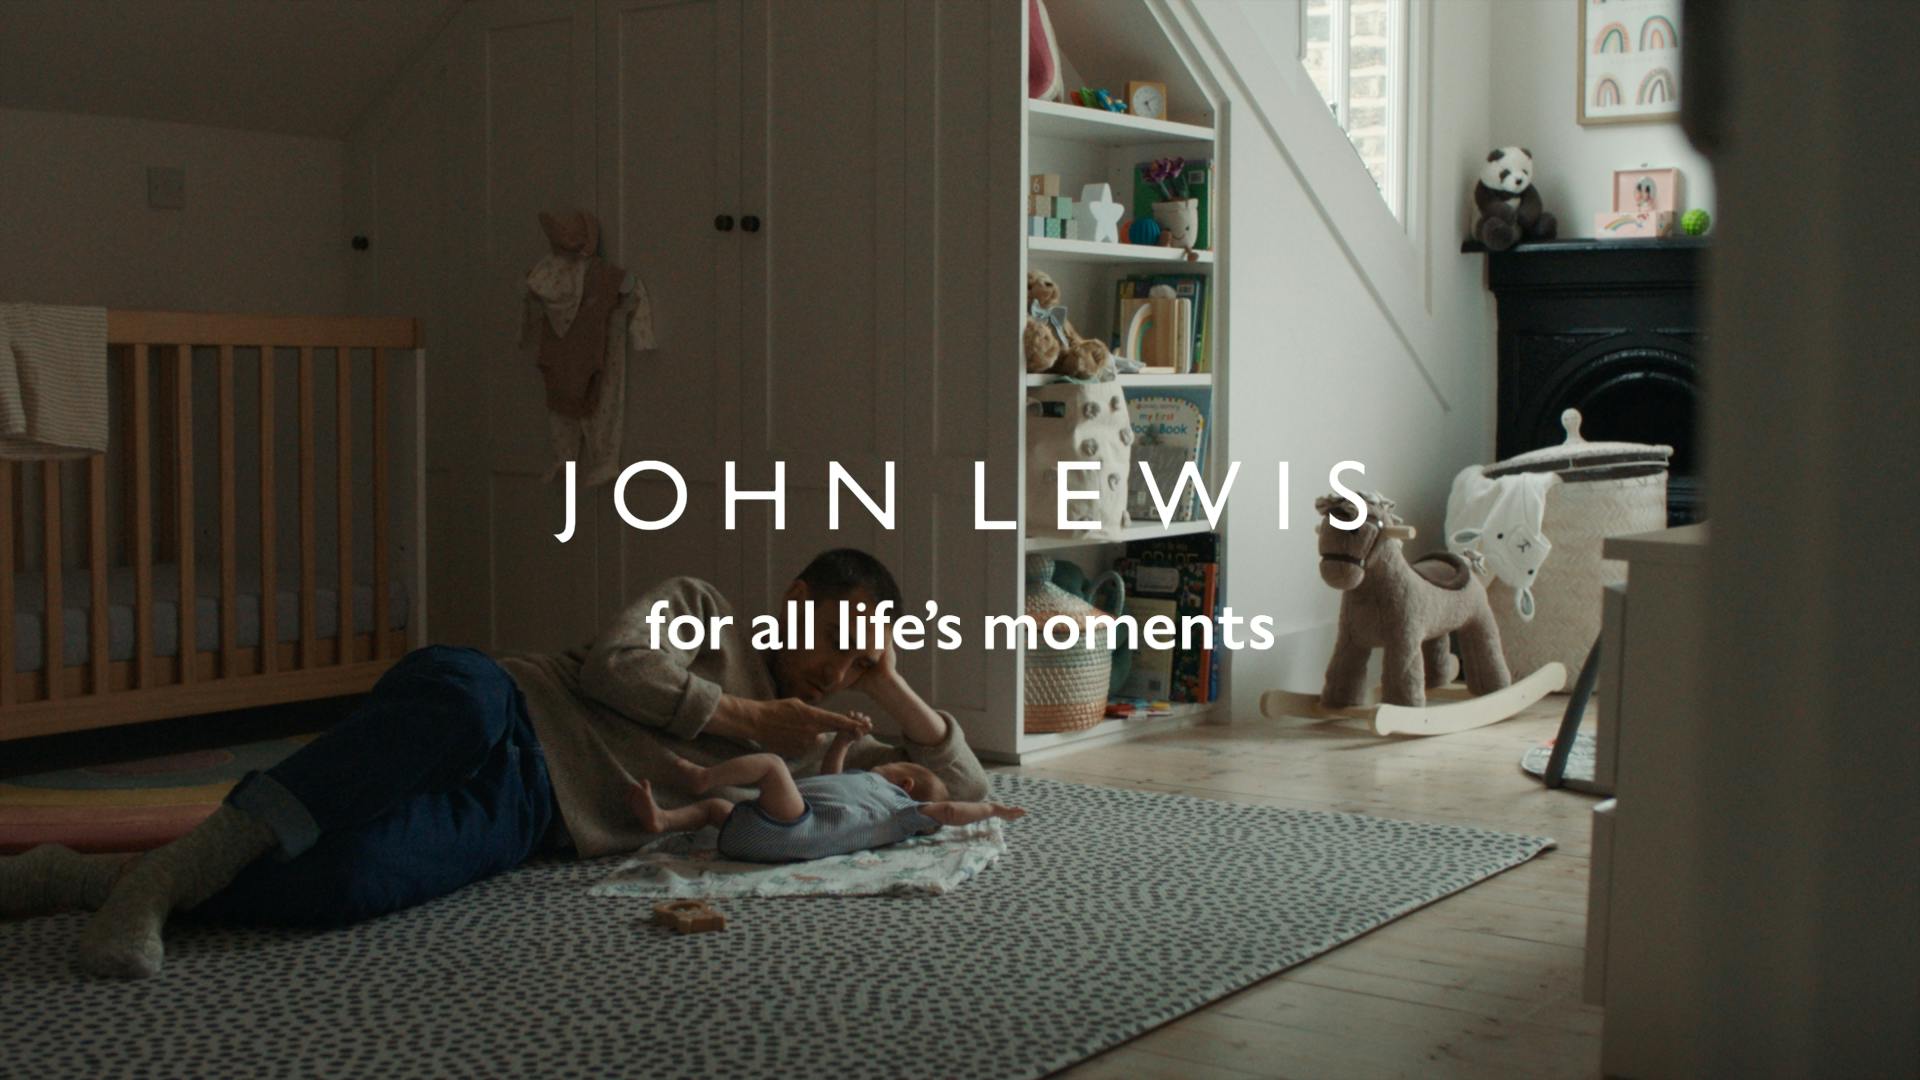 John Lewis says new brand promise is 'fundamental' to its turnaround